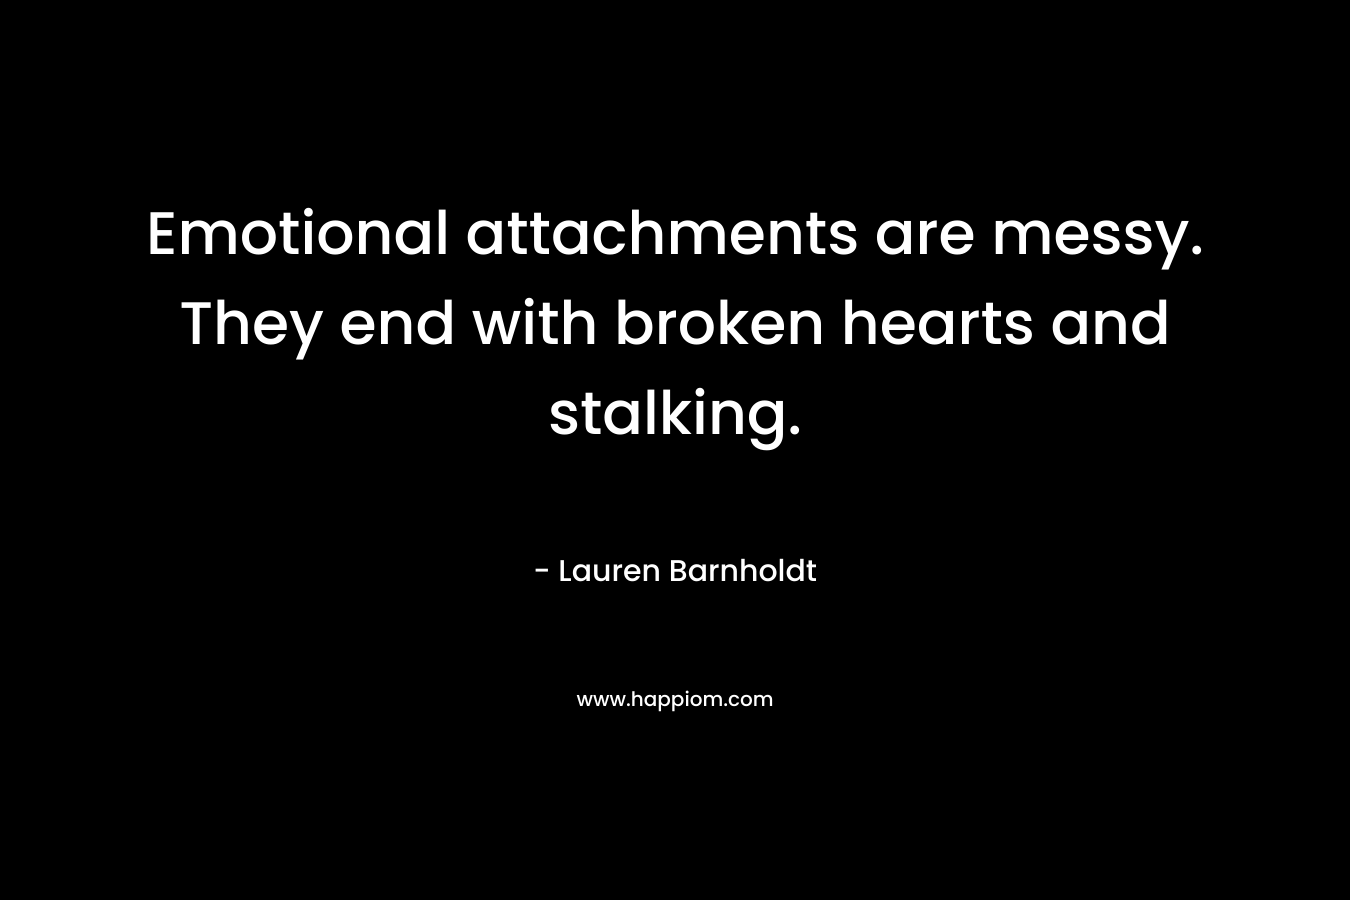 Emotional attachments are messy. They end with broken hearts and stalking. – Lauren Barnholdt